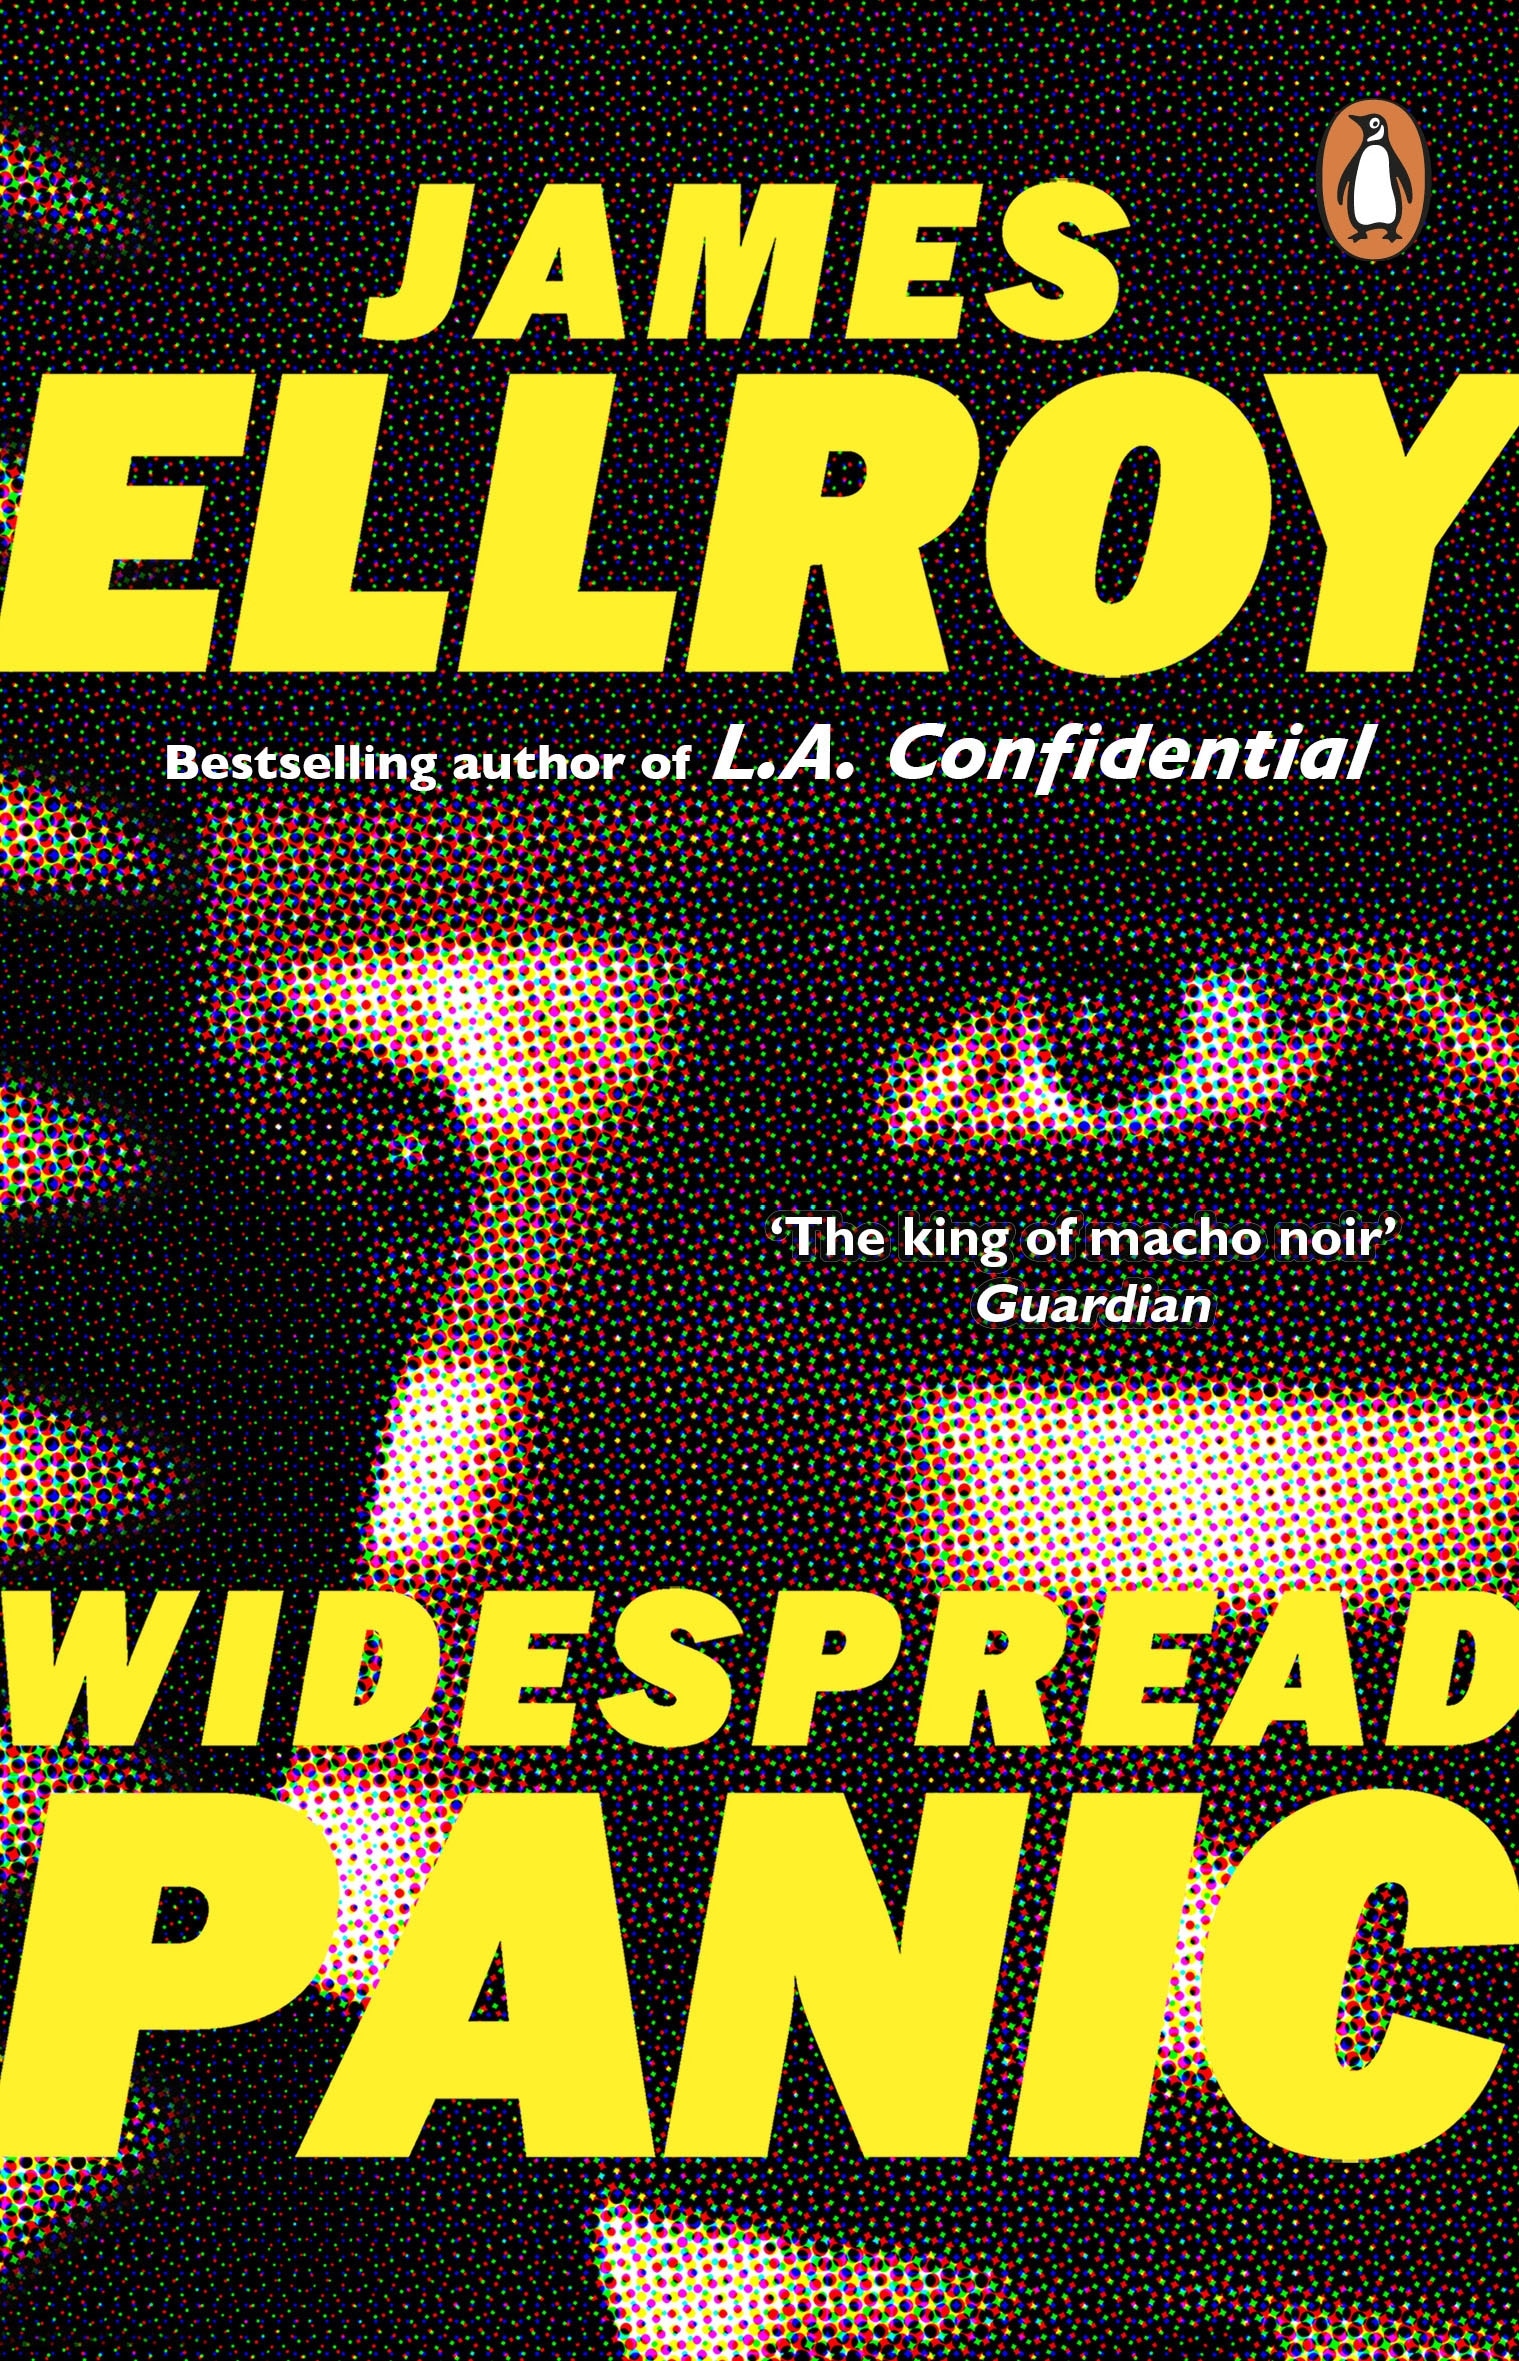 Book “Widespread Panic” by James Ellroy — June 2, 2022